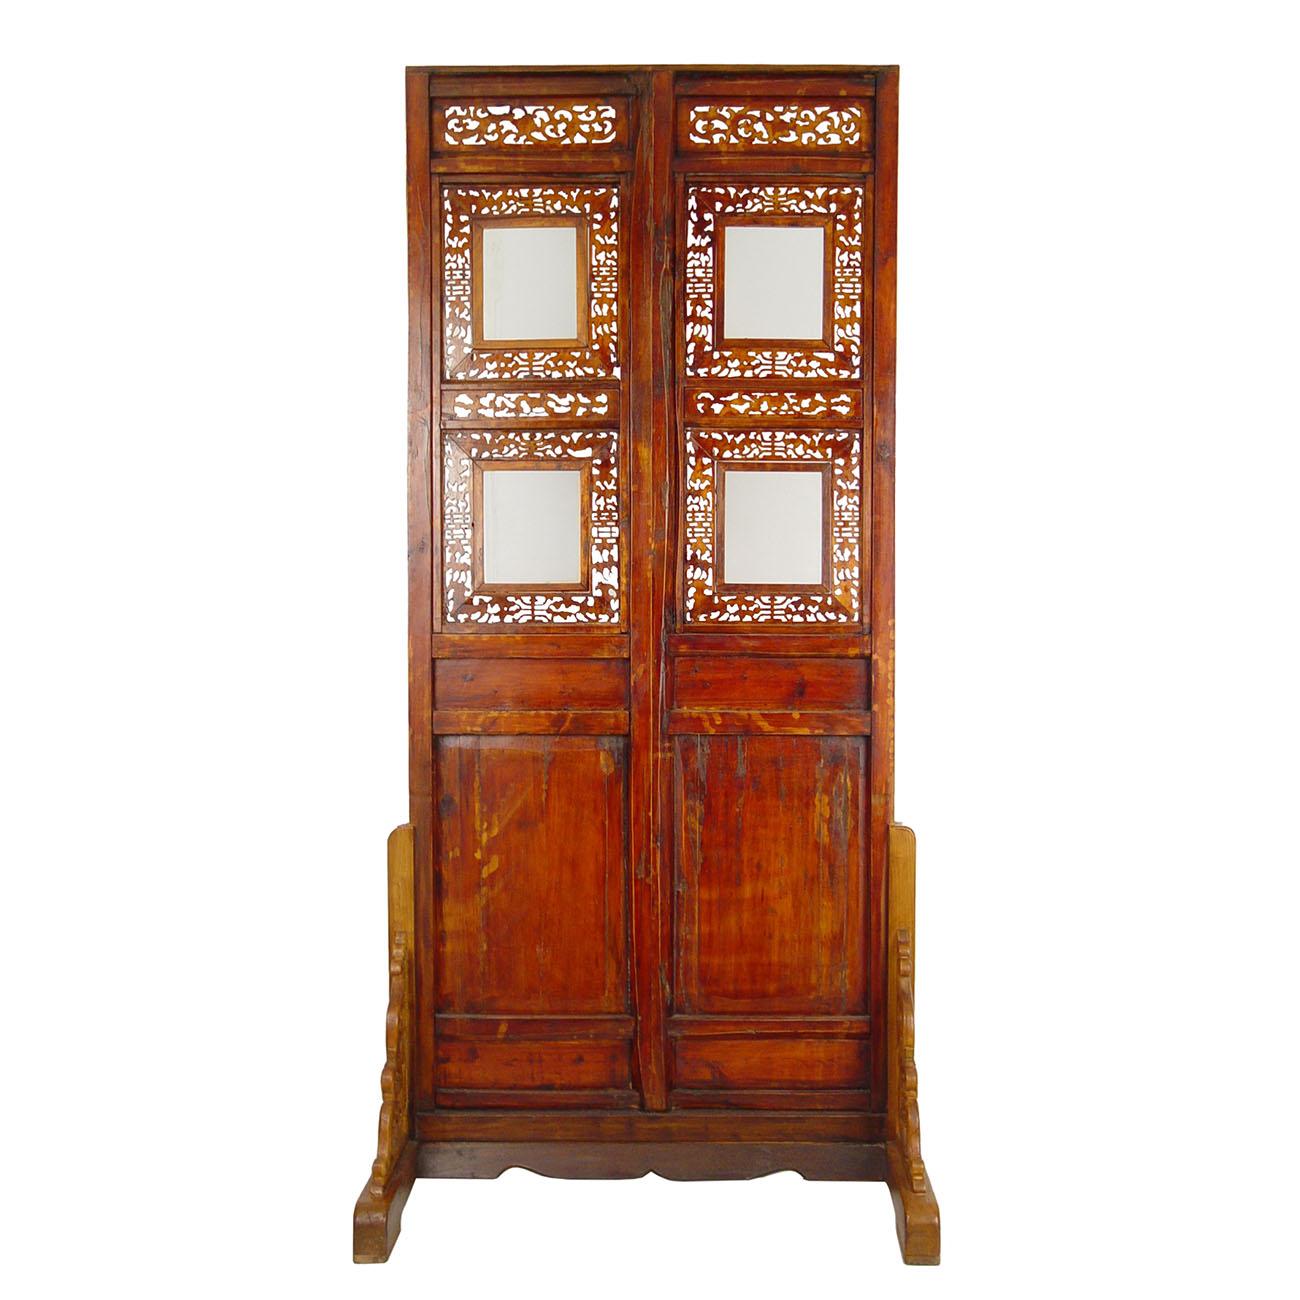 Early 20th Century Chinese Antique Open Carved Screen / Room Divider For Sale 6